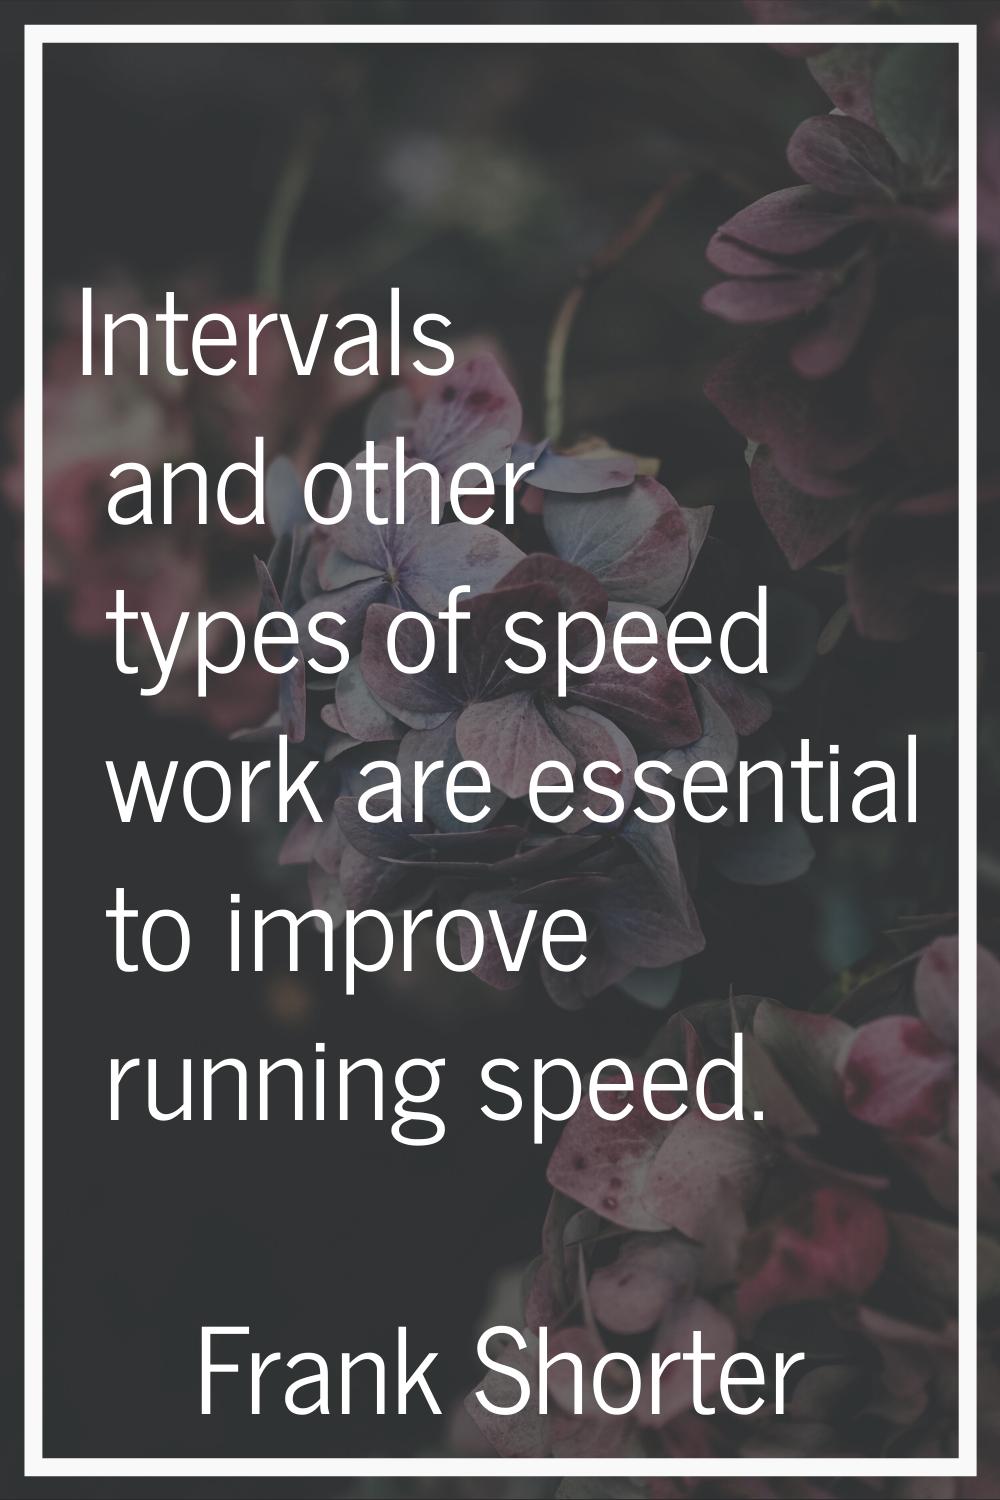 Intervals and other types of speed work are essential to improve running speed.